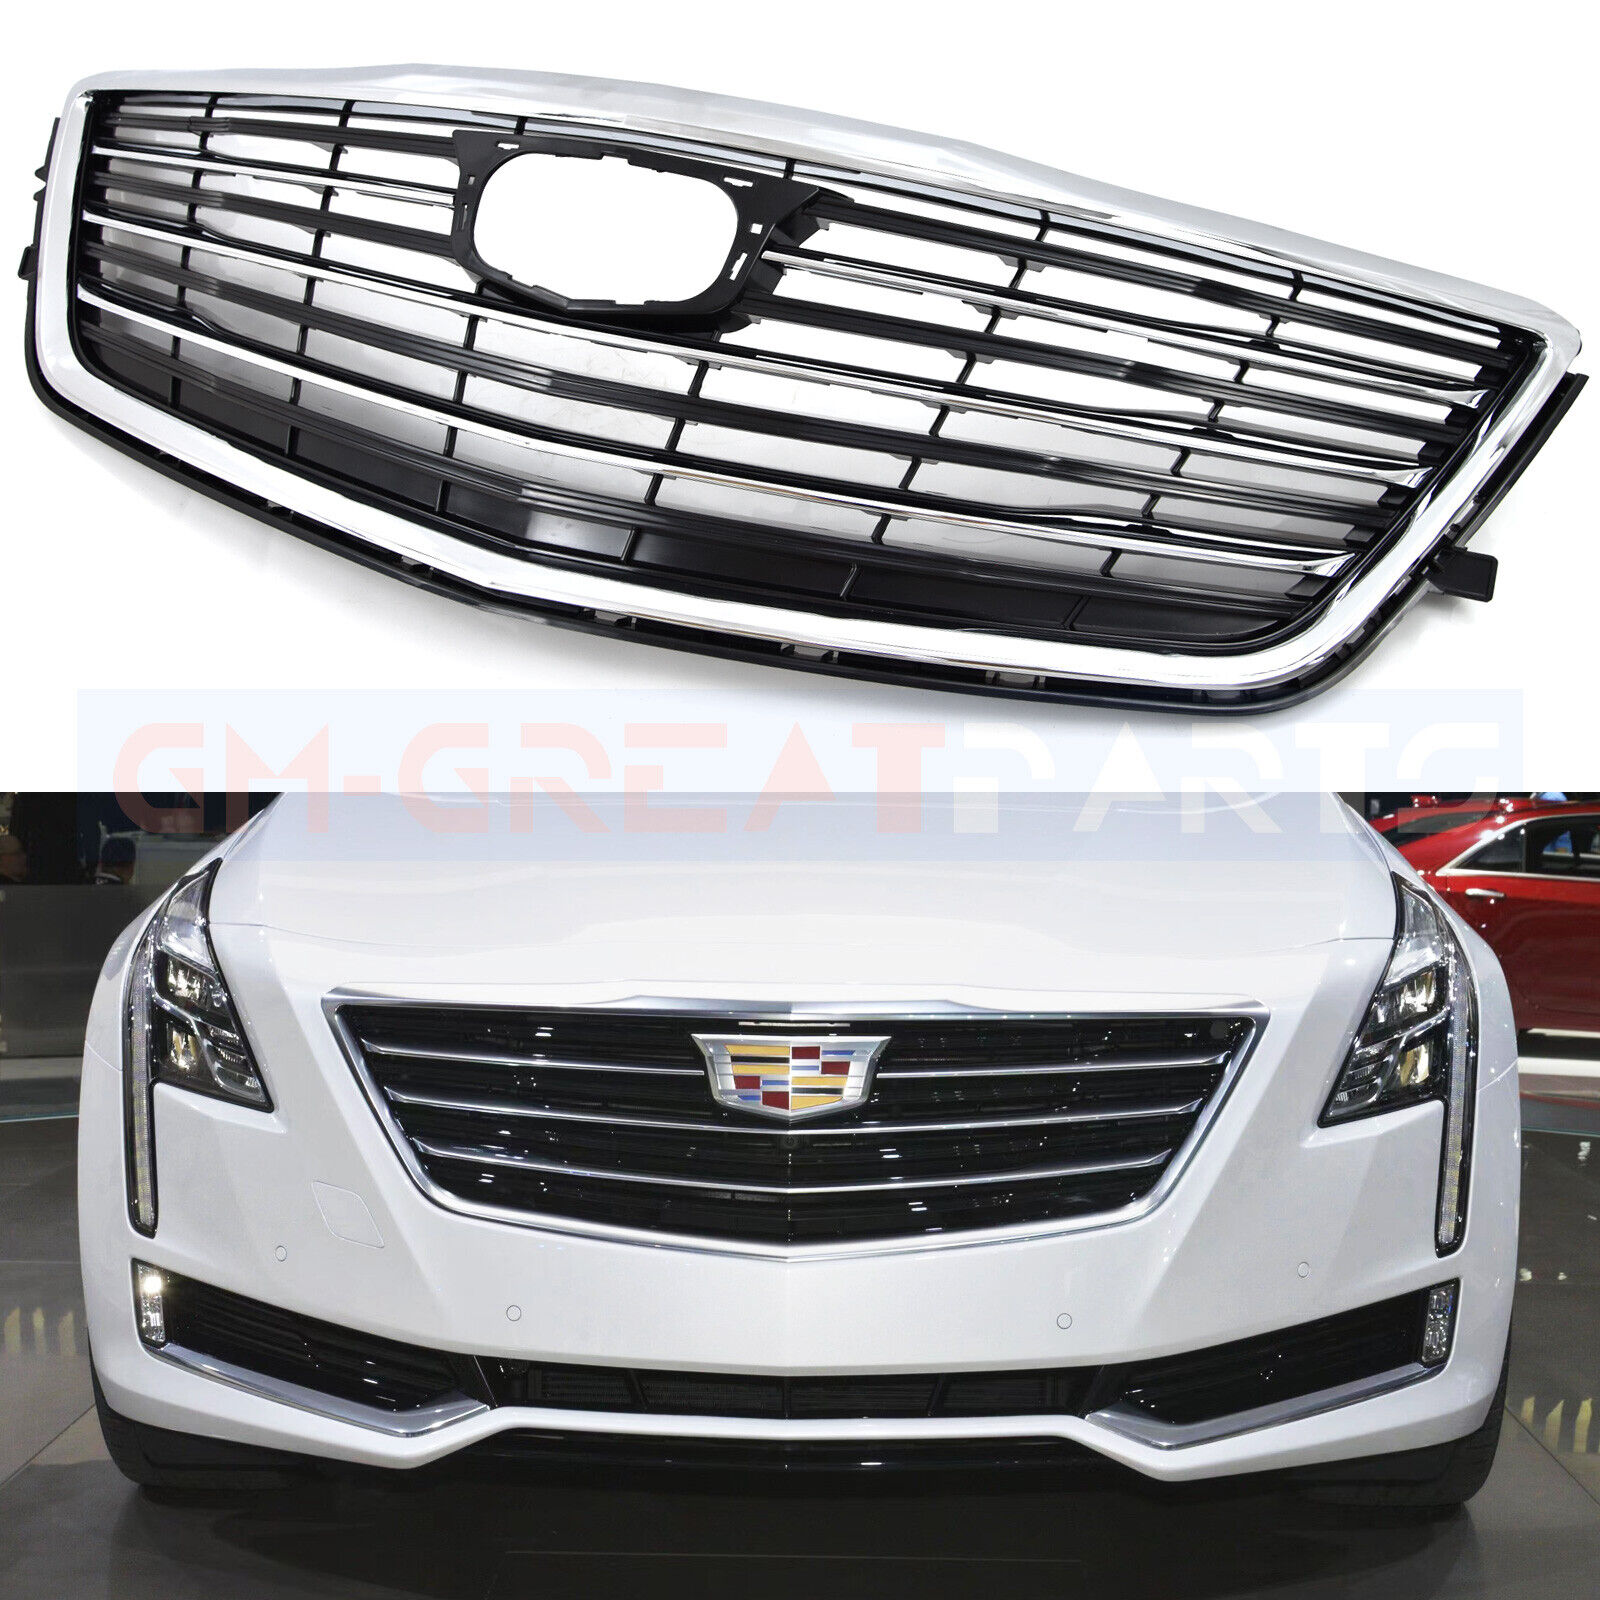 2016 2017 2018 CADILLAC CT6 FRONT UPPER BUMPER GRILLE GRILL CHROME OEM 84124488